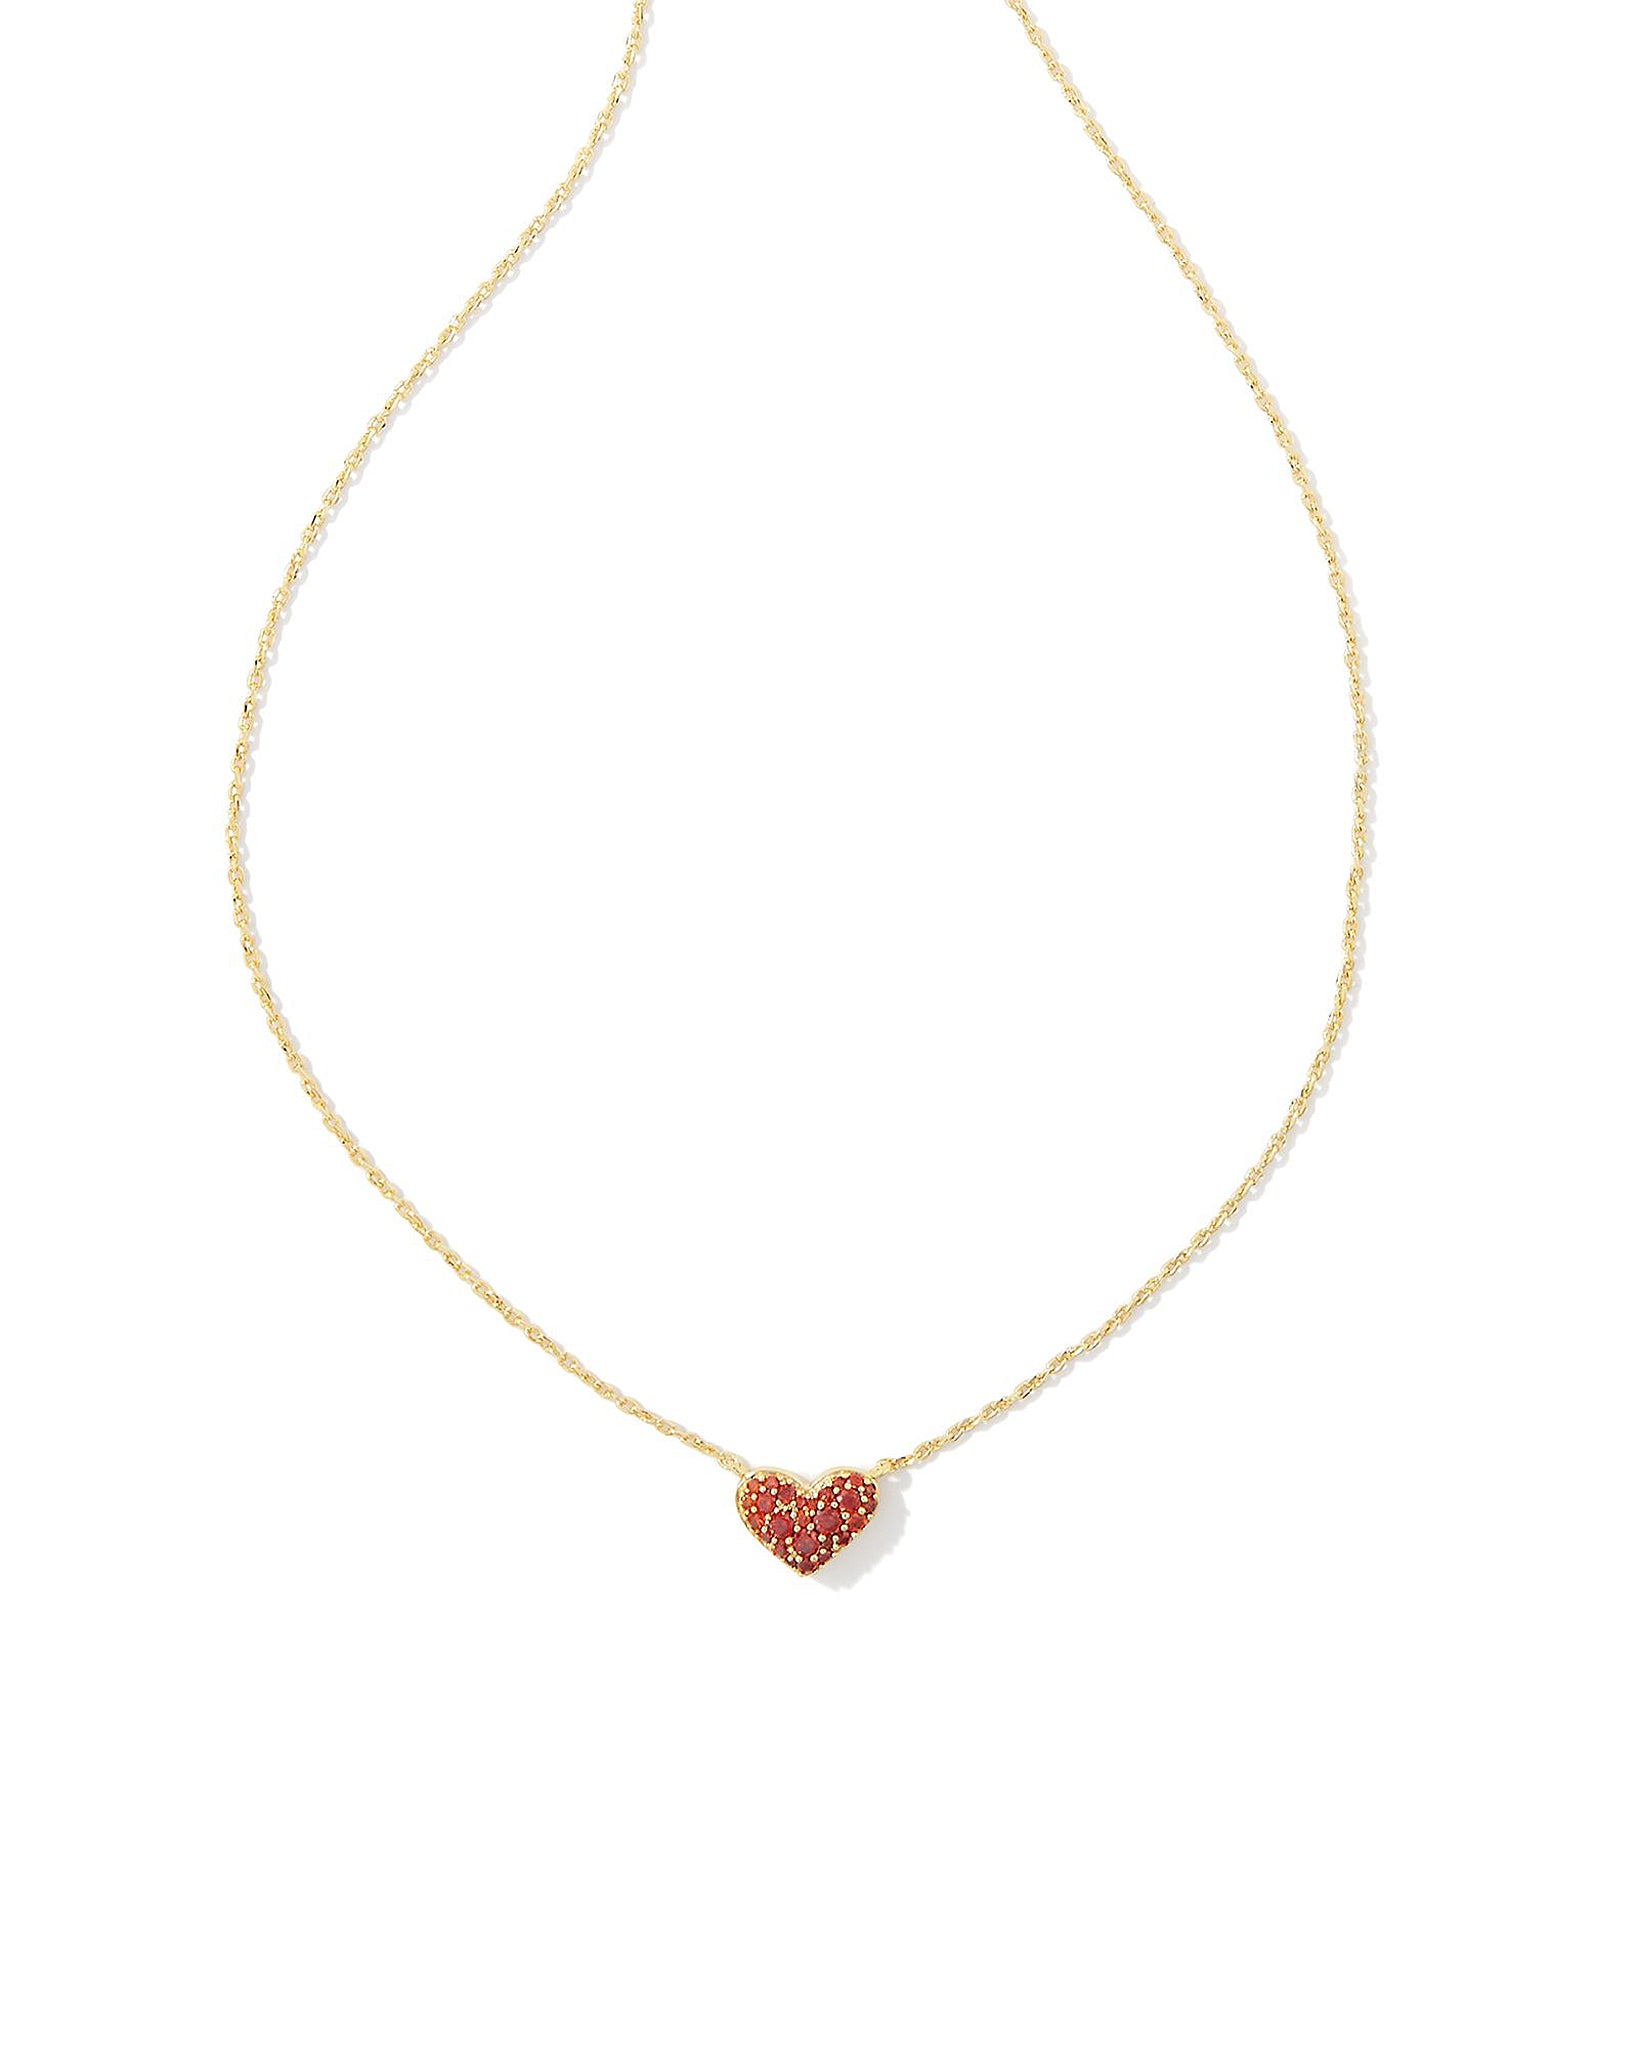 Kendra Scott Ari Pave Crystal Heart Pendant Necklace in Red Crystal and Gold